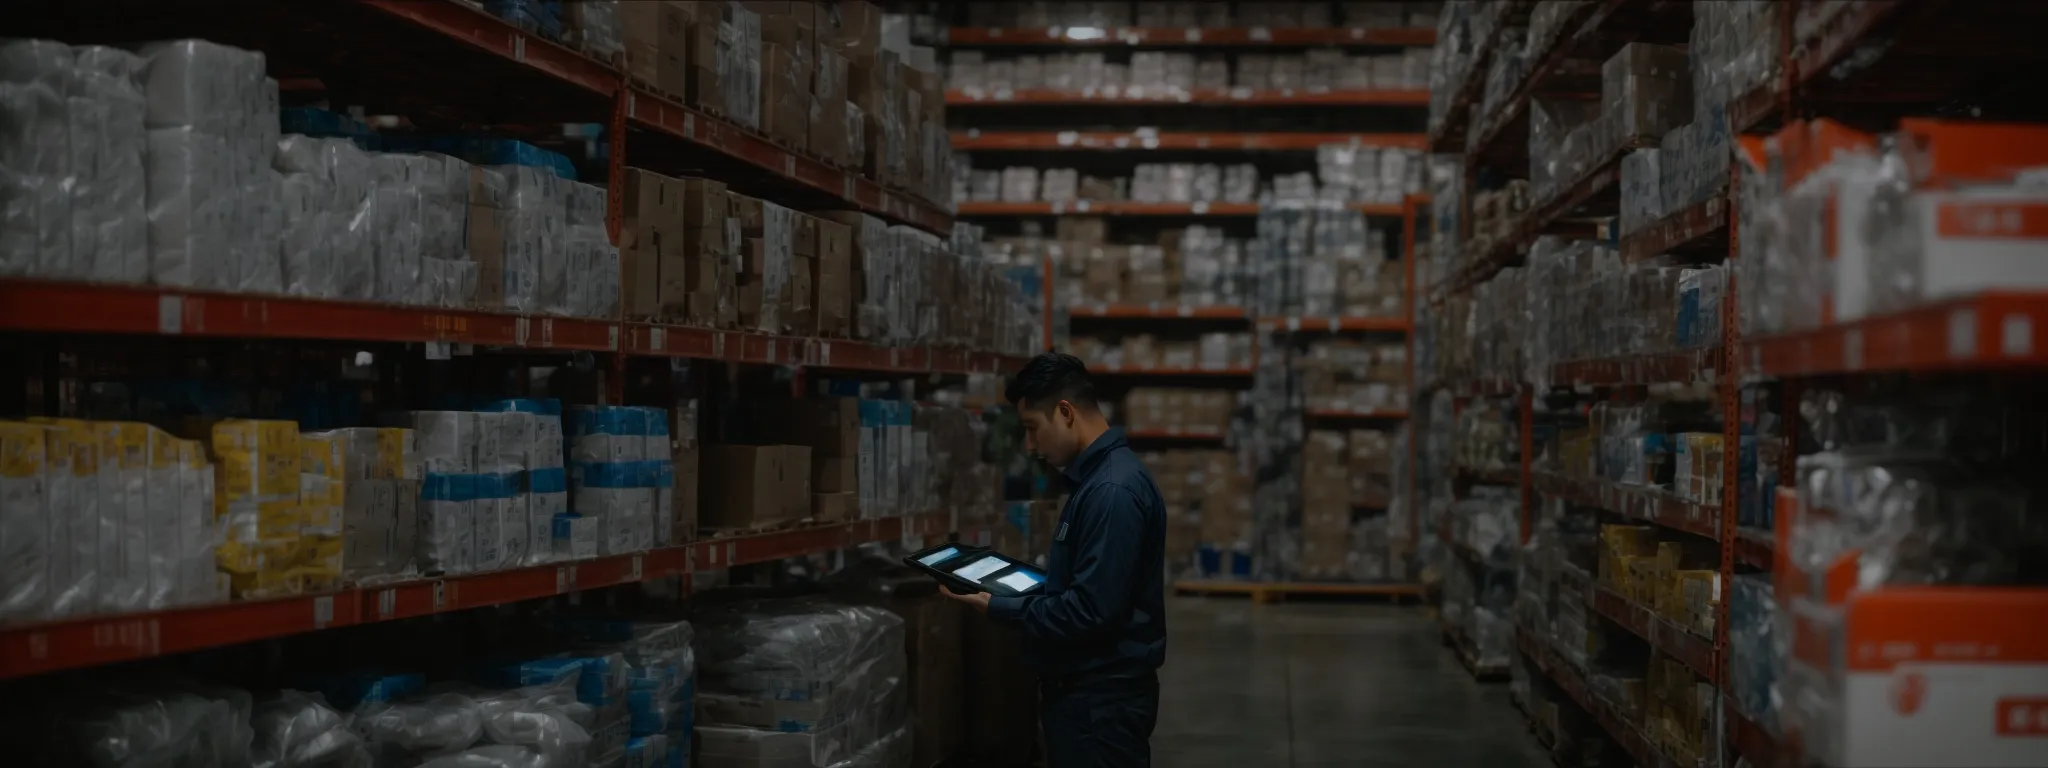 a warehouse worker reviews a digital inventory management system on a tablet amidst rows of shelves with various products.